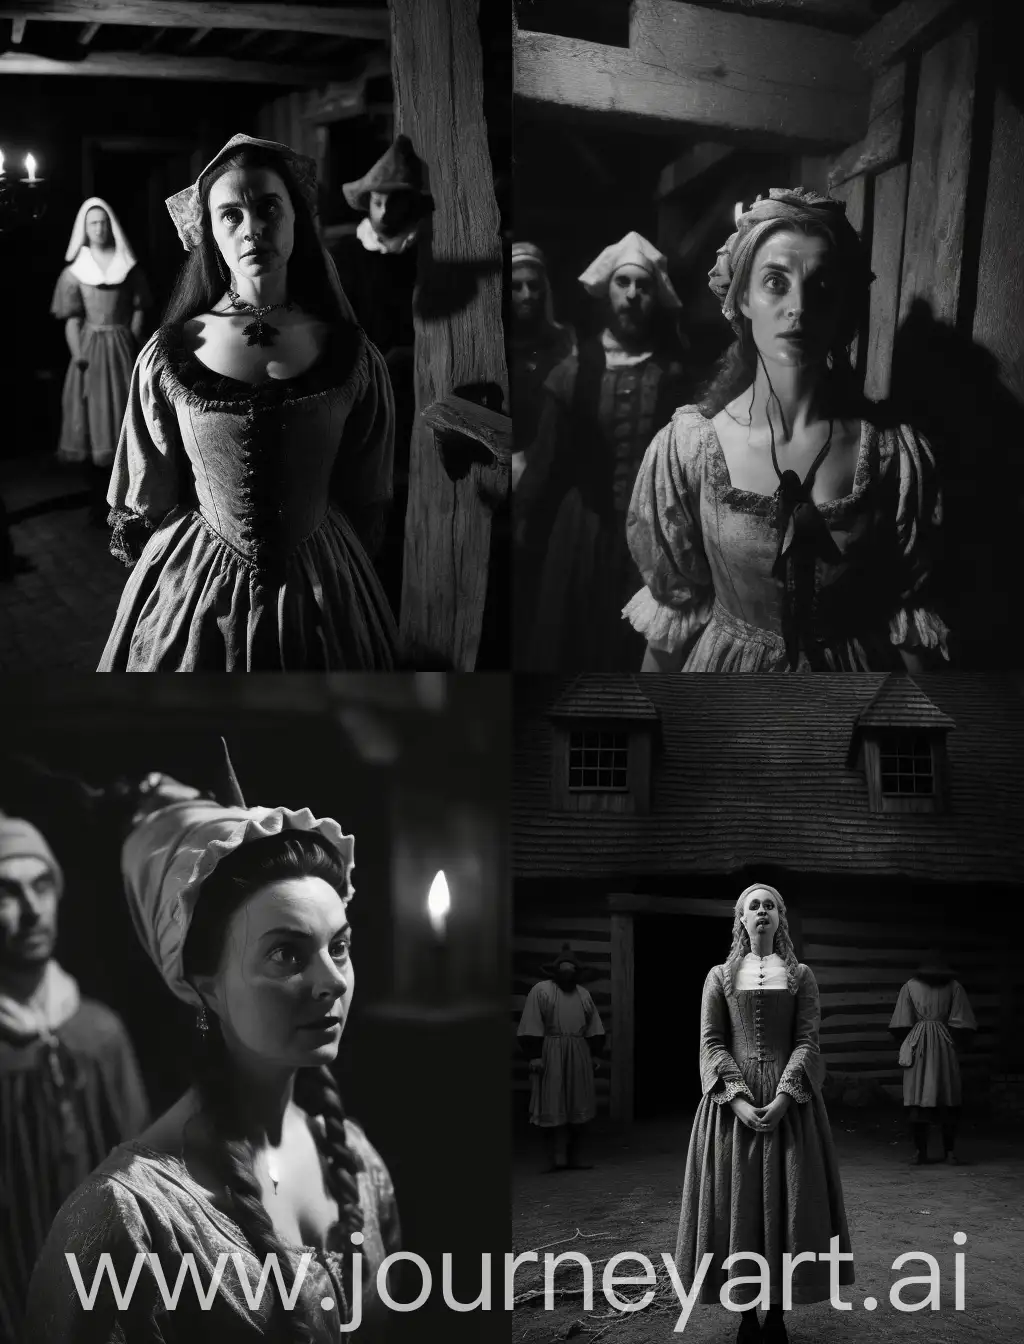 Salem-Witch-Trials-Revisited-Unhinged-Pagan-Horror-Captured-in-Dark-Film-Photography